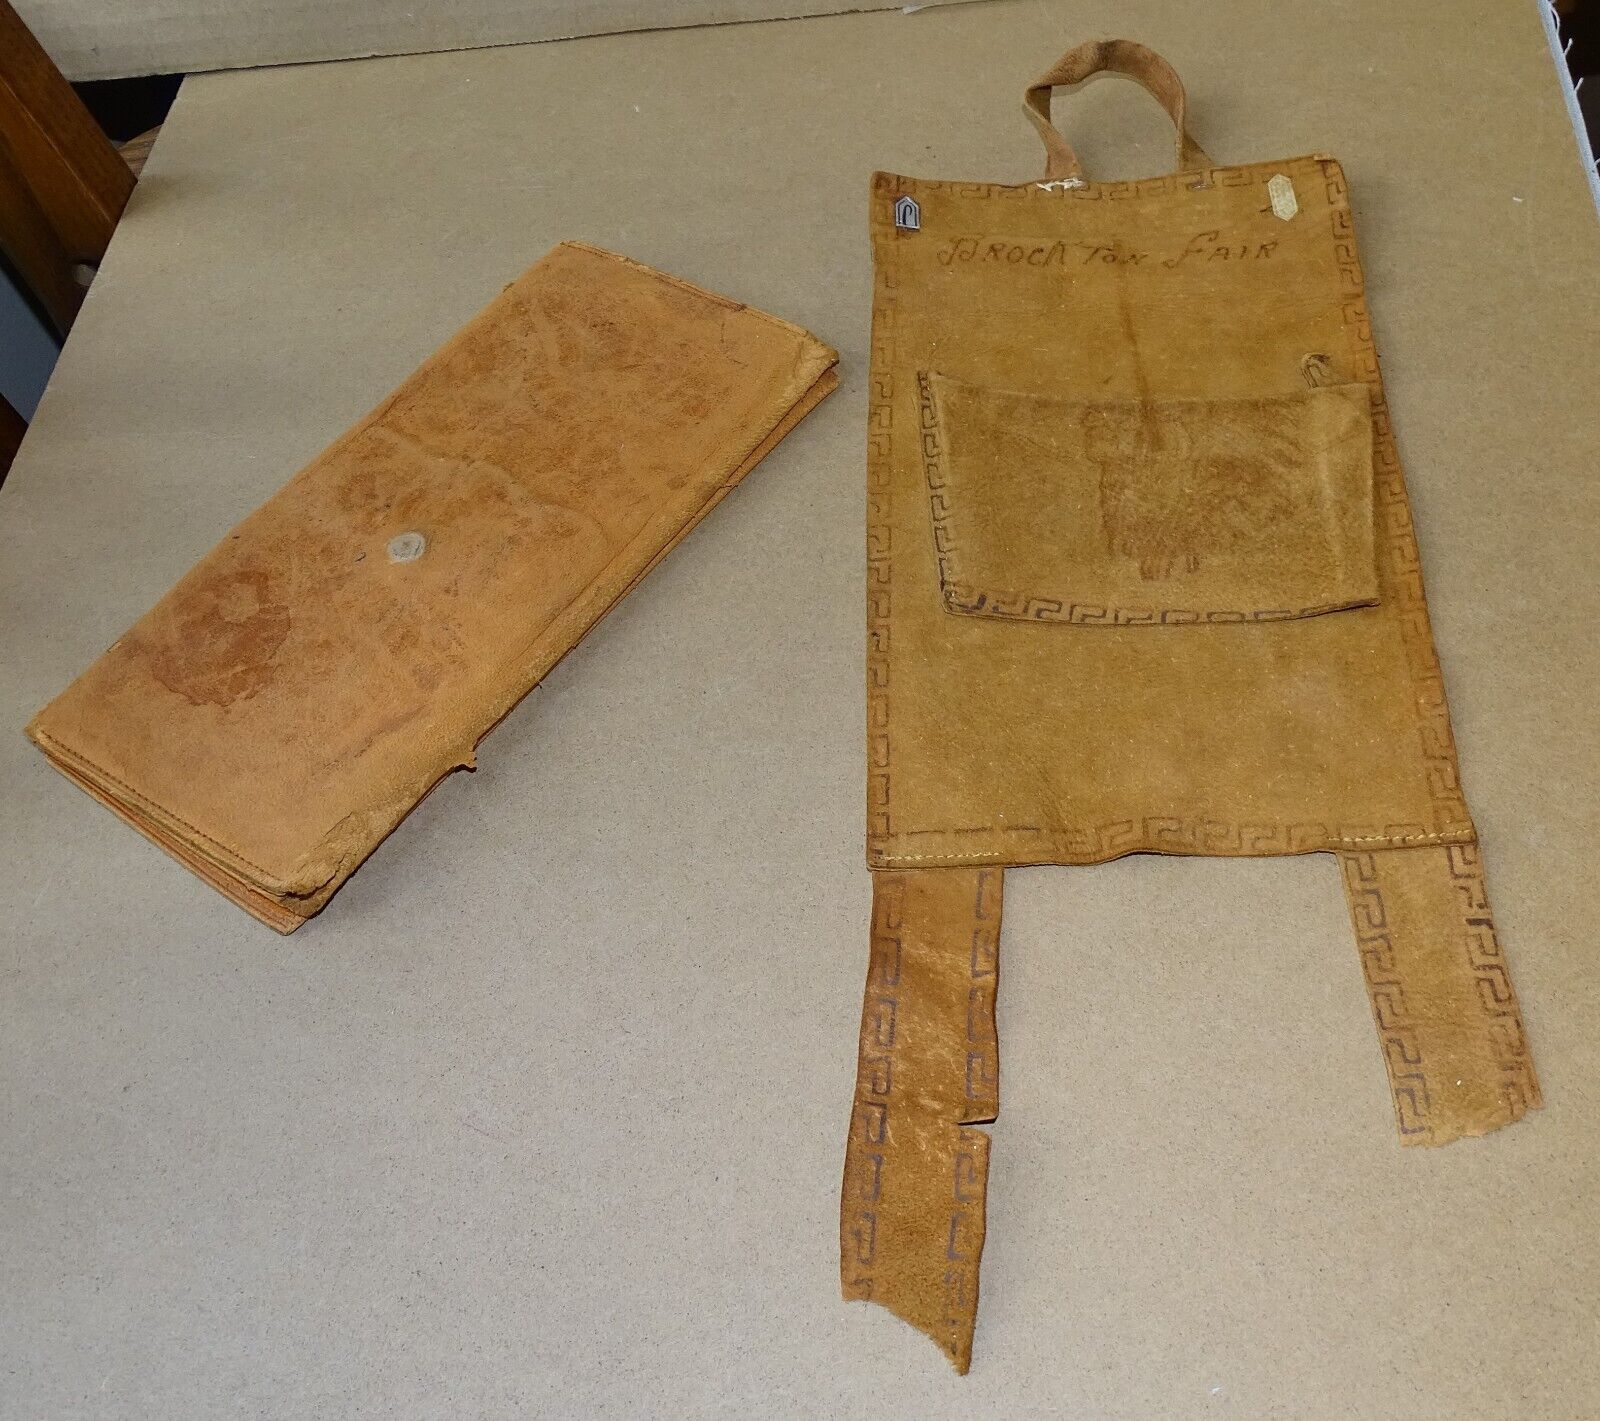 2 old leather items from an estate sale - 1800s? Billfold & Brockton Fair Craft